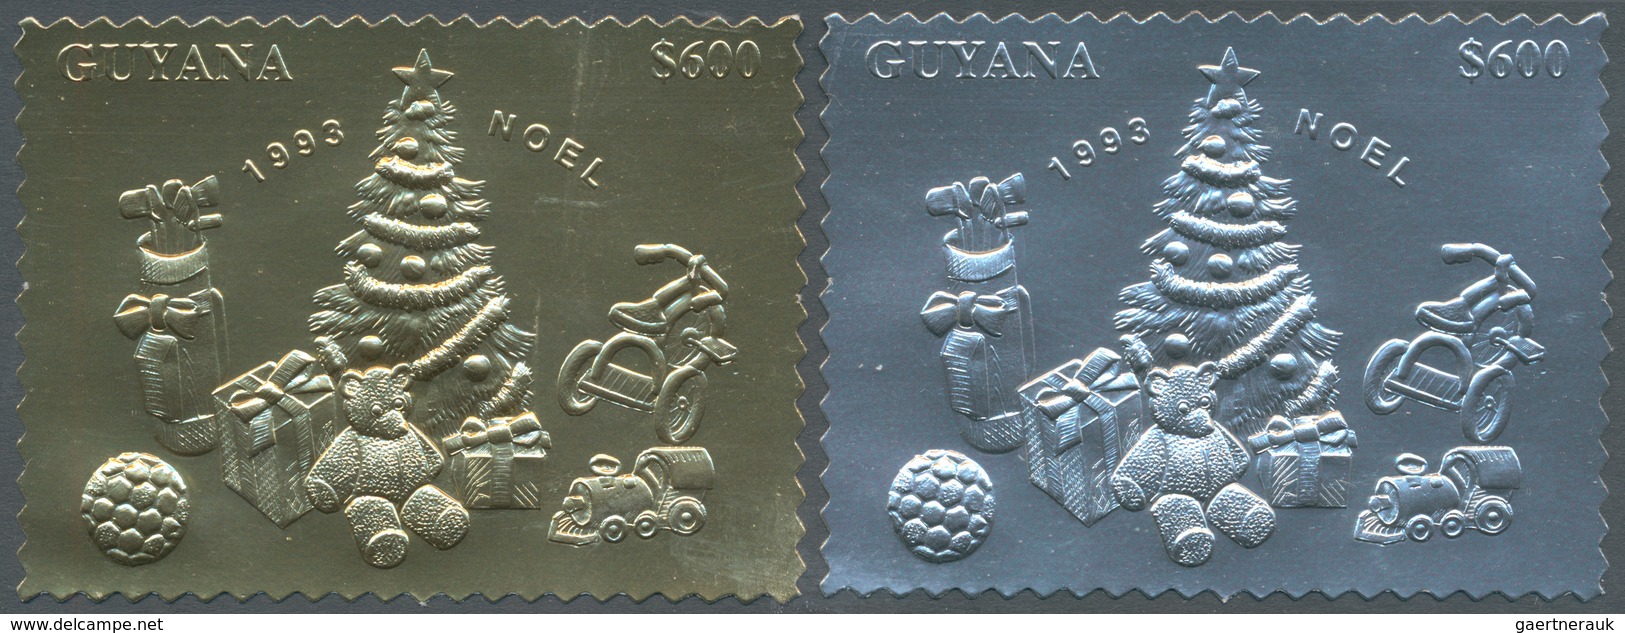 Thematik: Weihnachten / Christmas: 1993, Guyana. Lot Of 100 GOLD Stamps And 100 SILVER Stamps CHRIST - Navidad